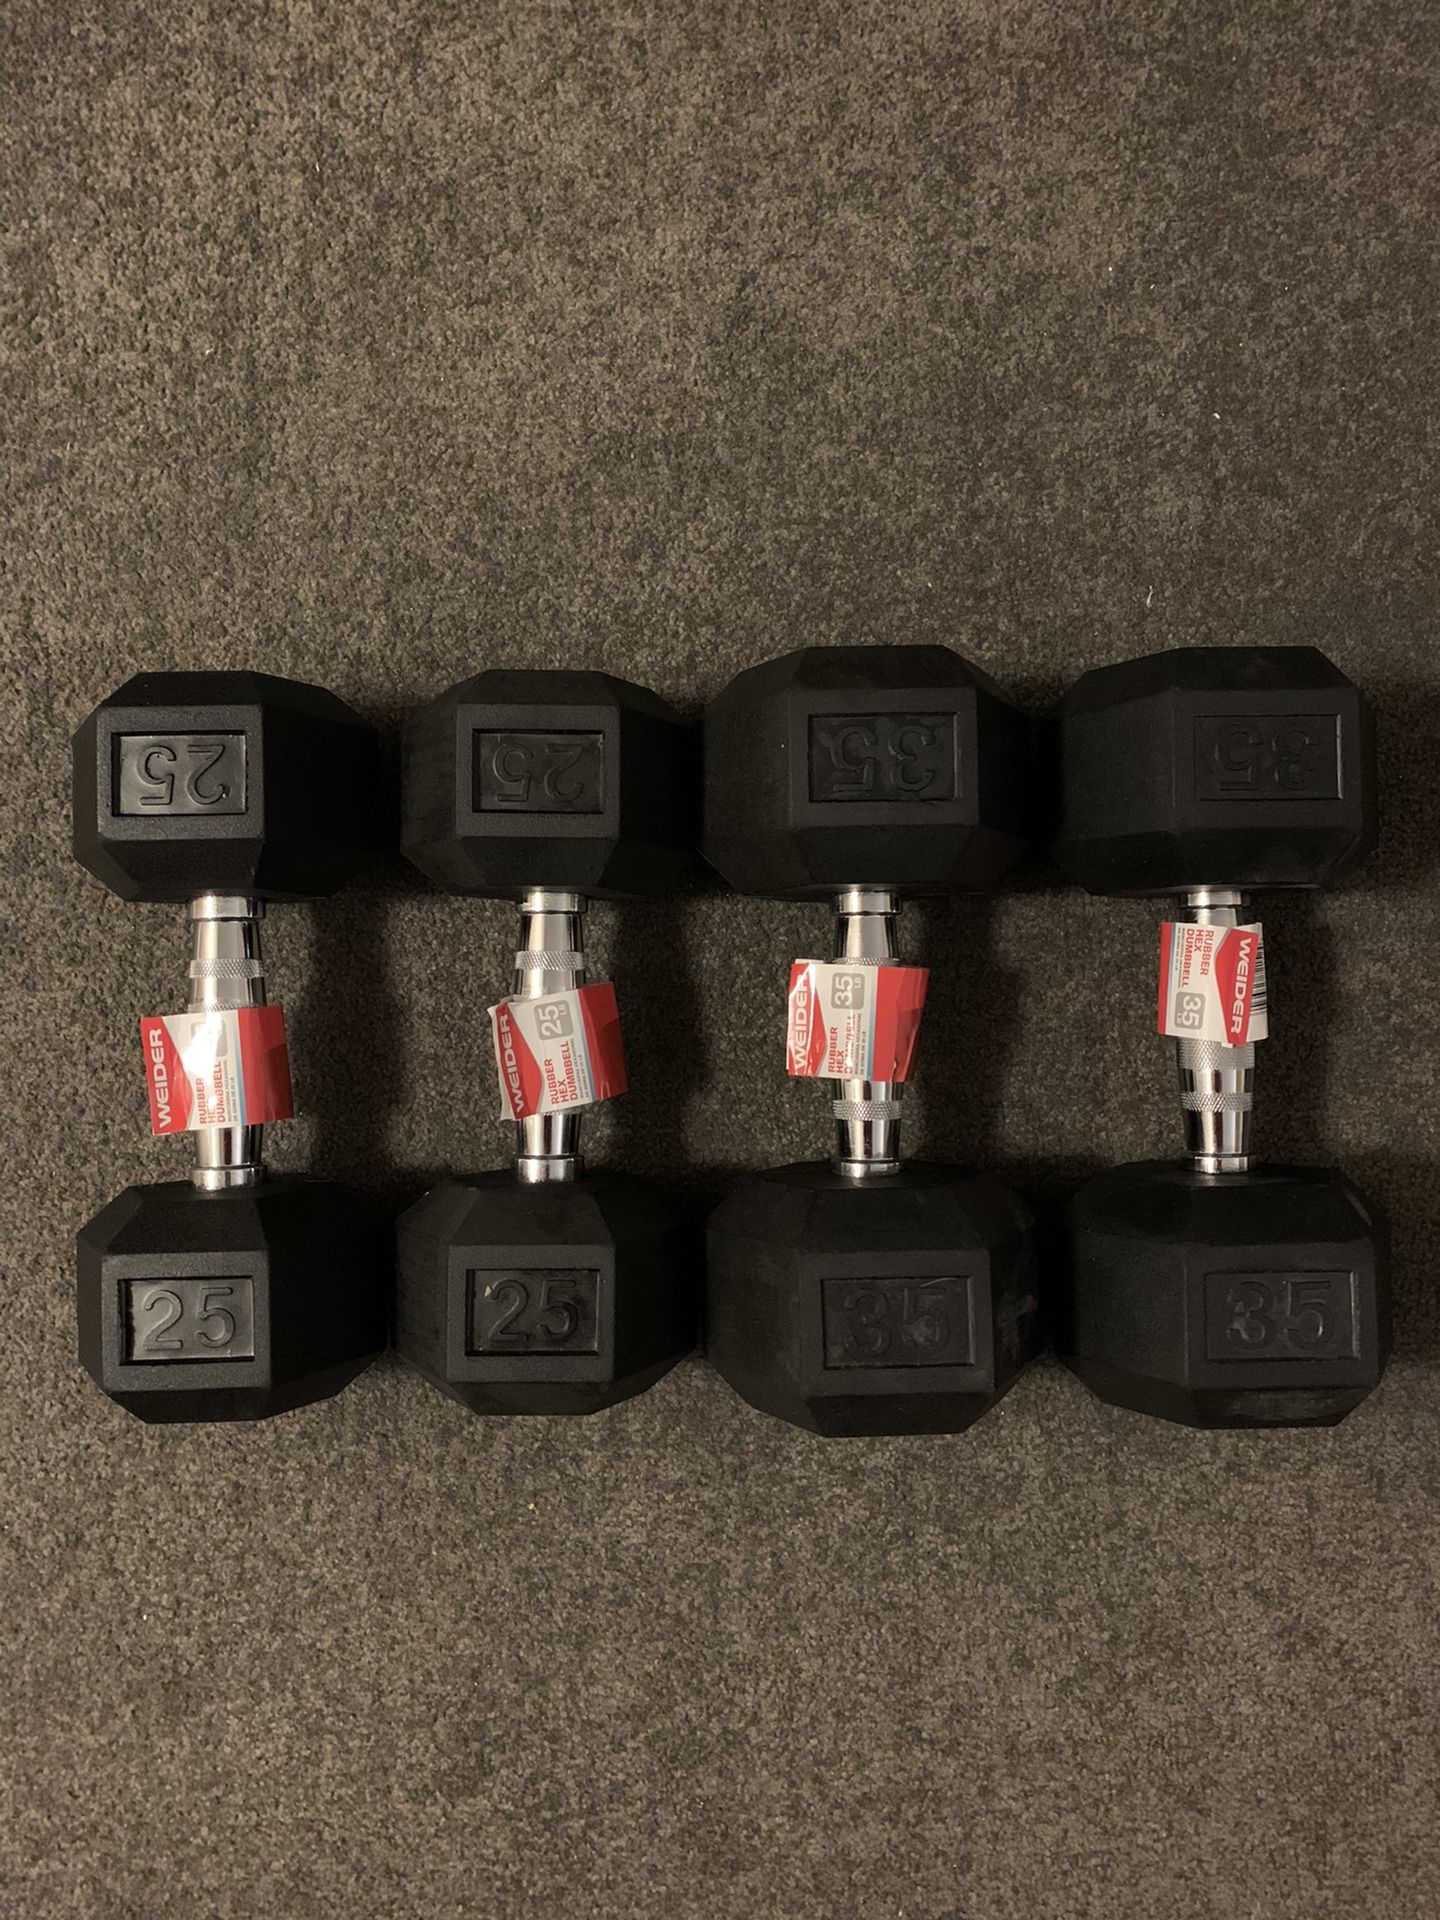 2 Sets of Rubber Hex Dumbbells (25 and 35 LBS) - BRAND NEW